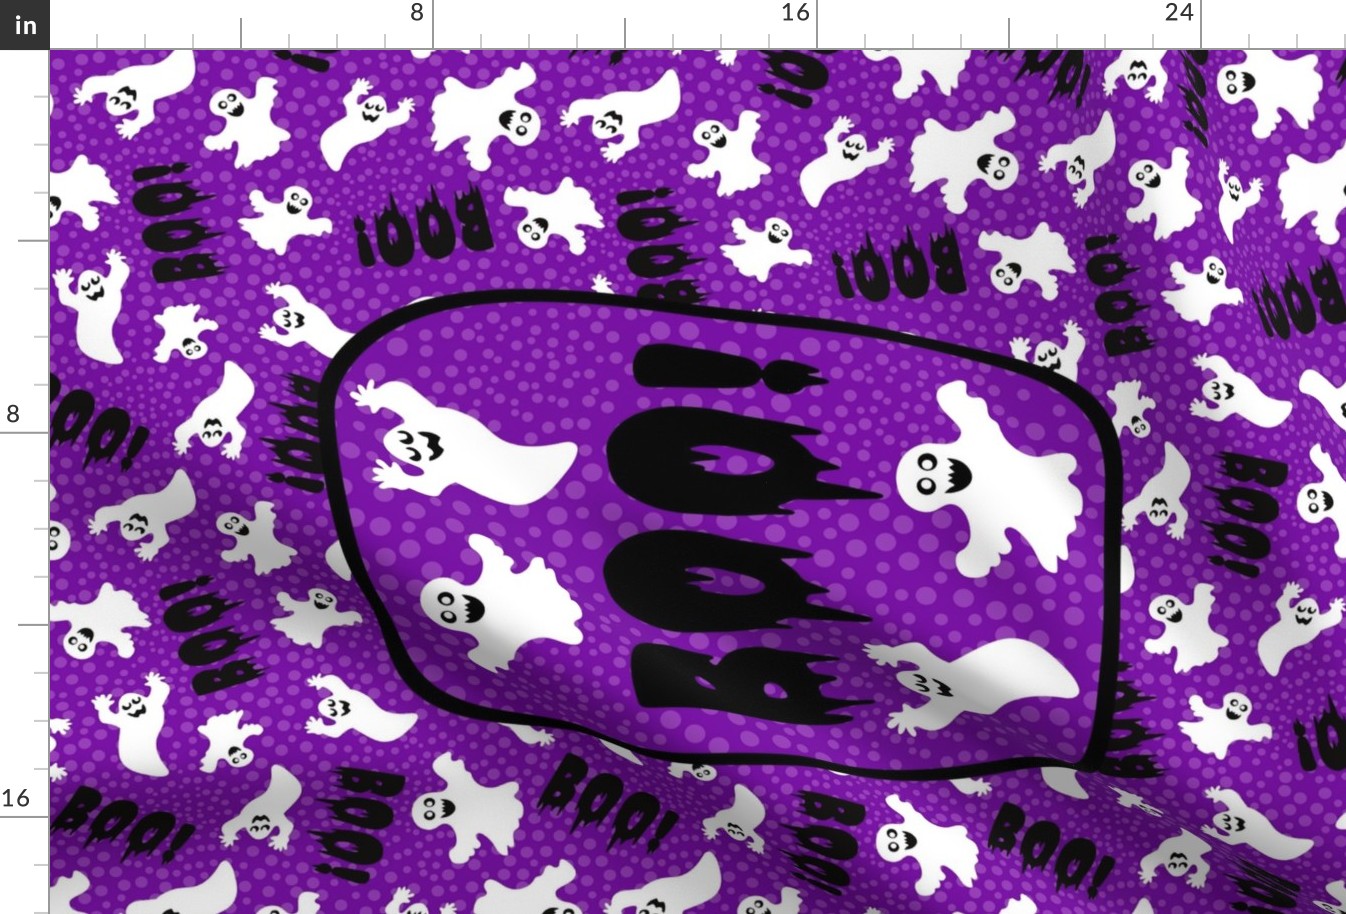 Large 27x18 Fat Quarter Panel Boo! White Creepy Halloween Ghosts for Tea Towel or Wall Hanging on Purple